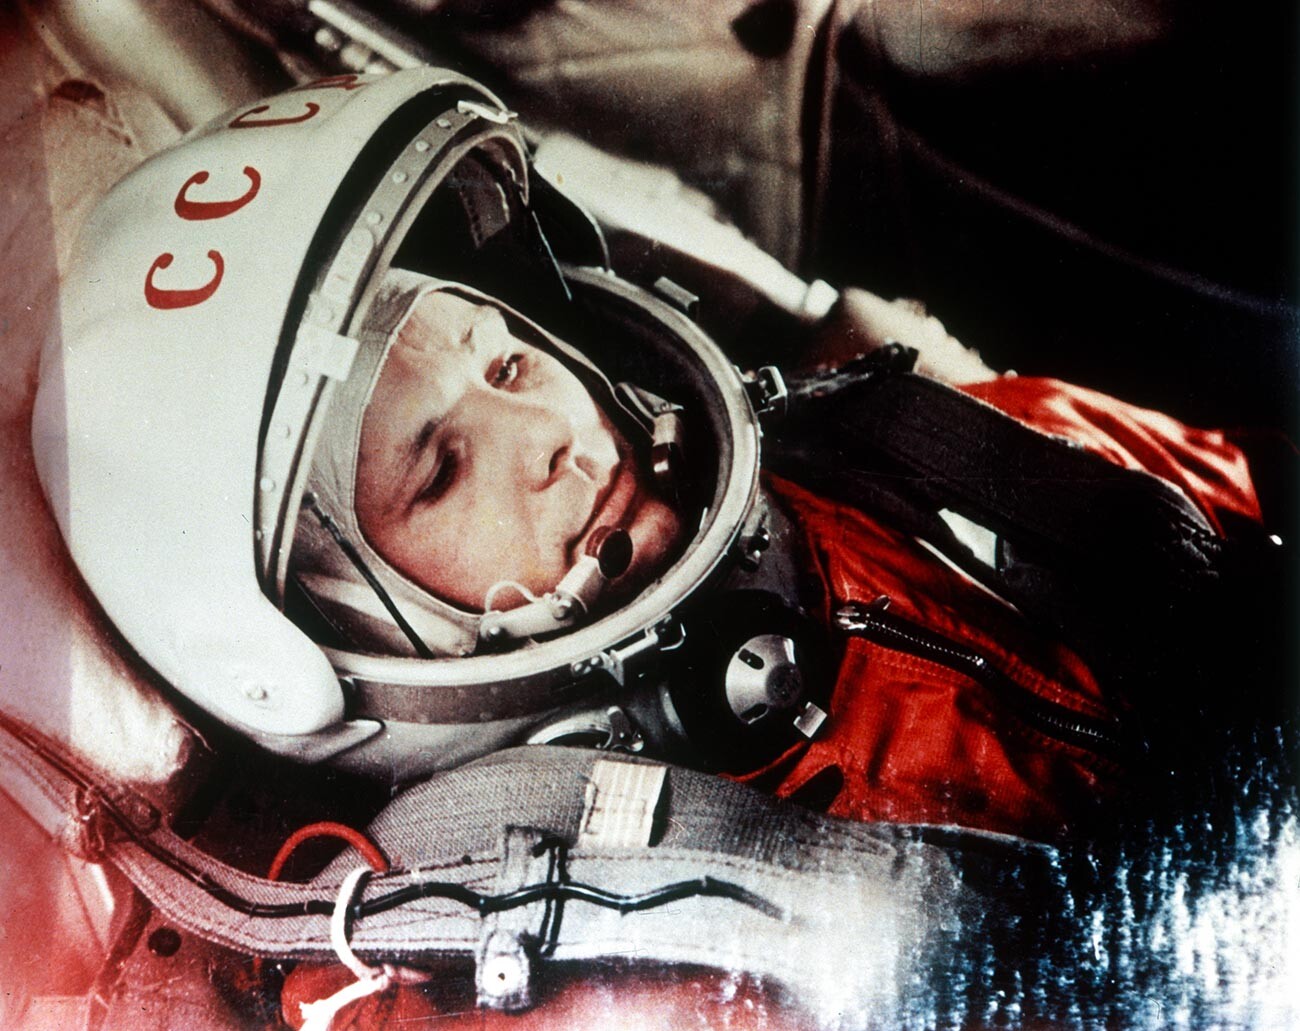 Yury Gagain, the first man in space